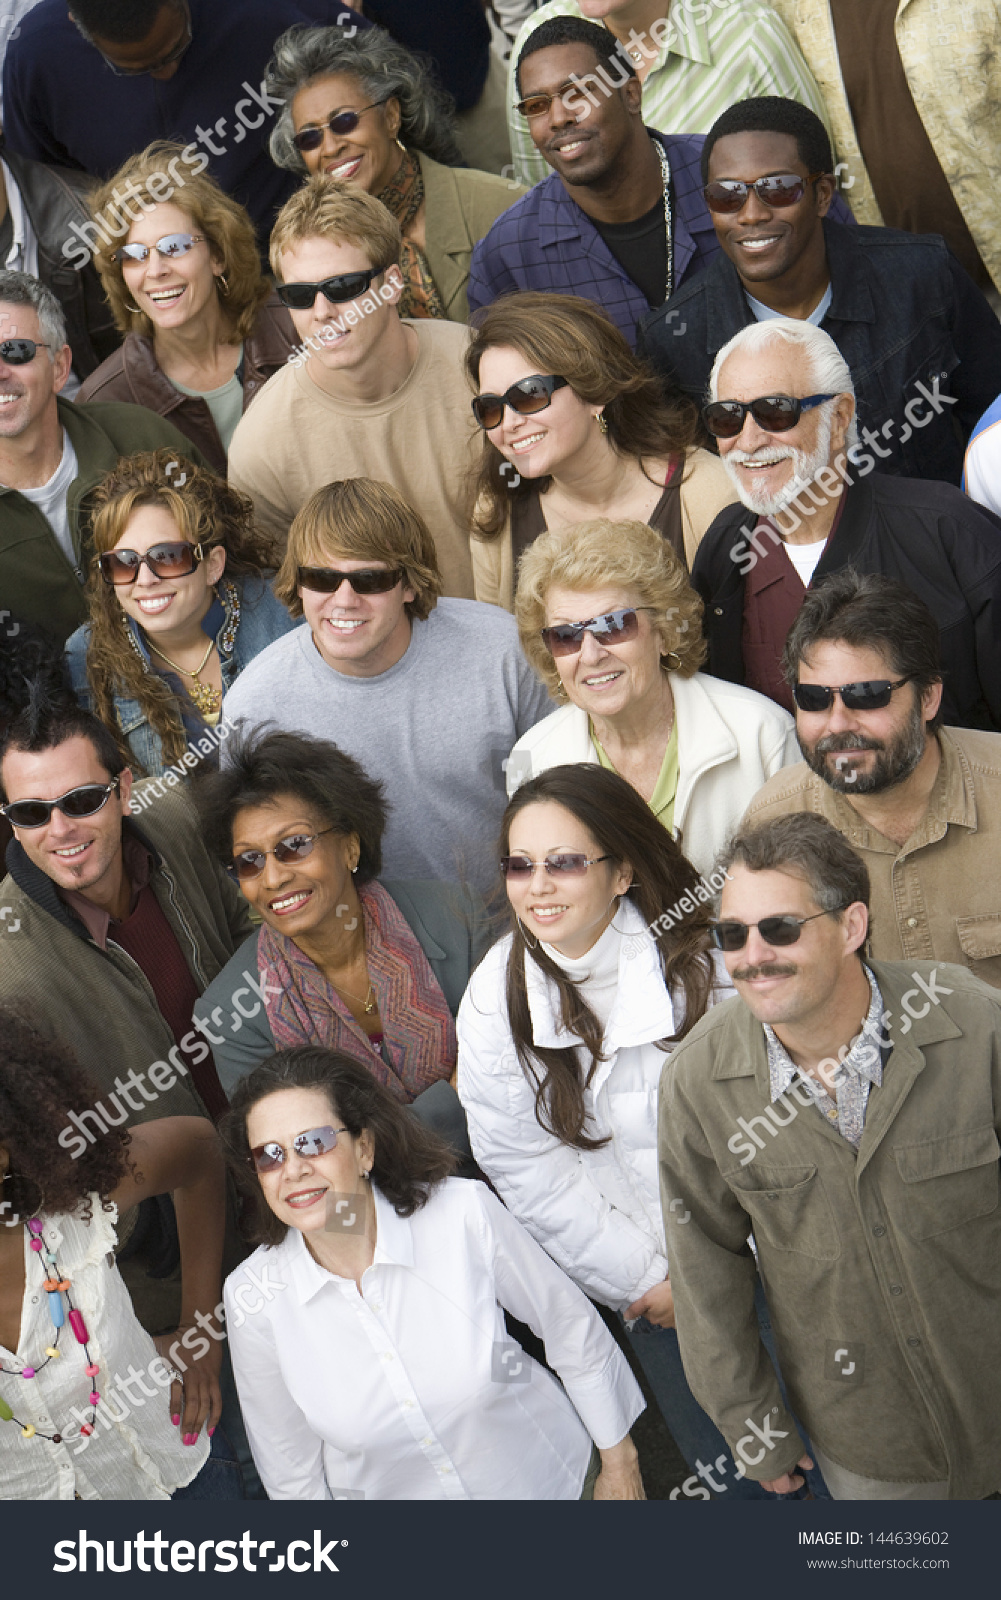 High angle view of multiethnic people wearing sunglasses #144639602